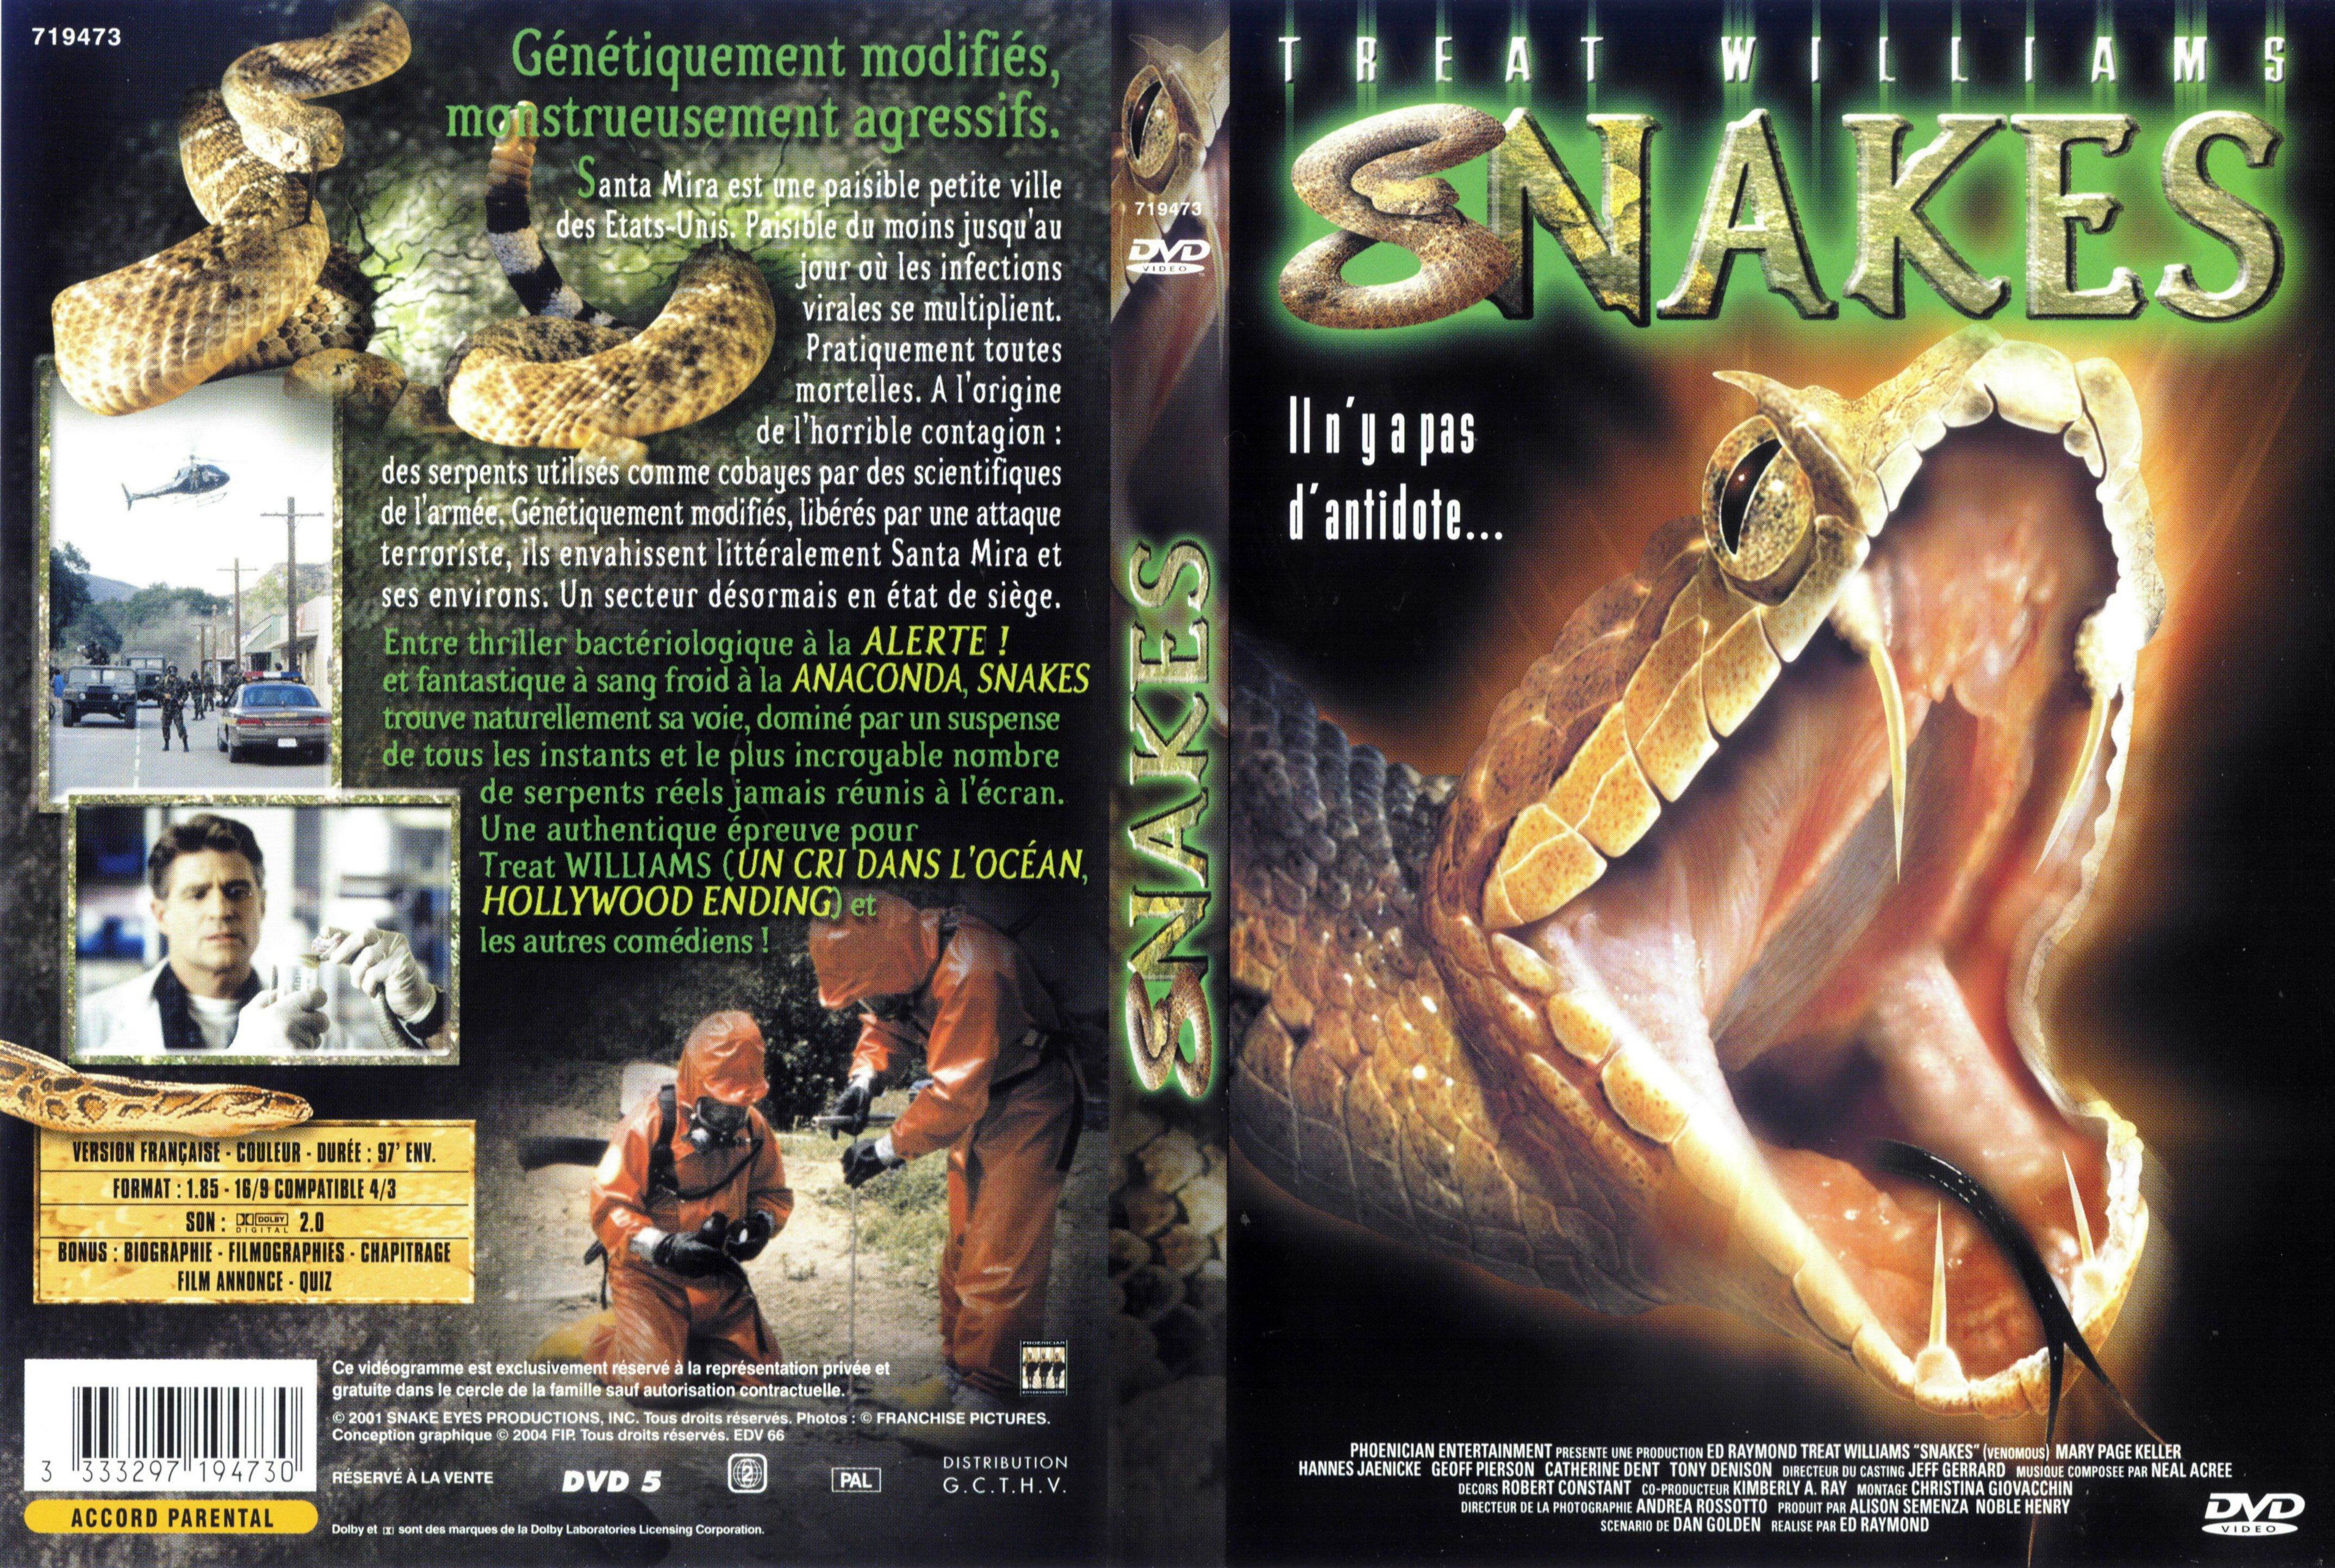 Jaquette DVD Snakes